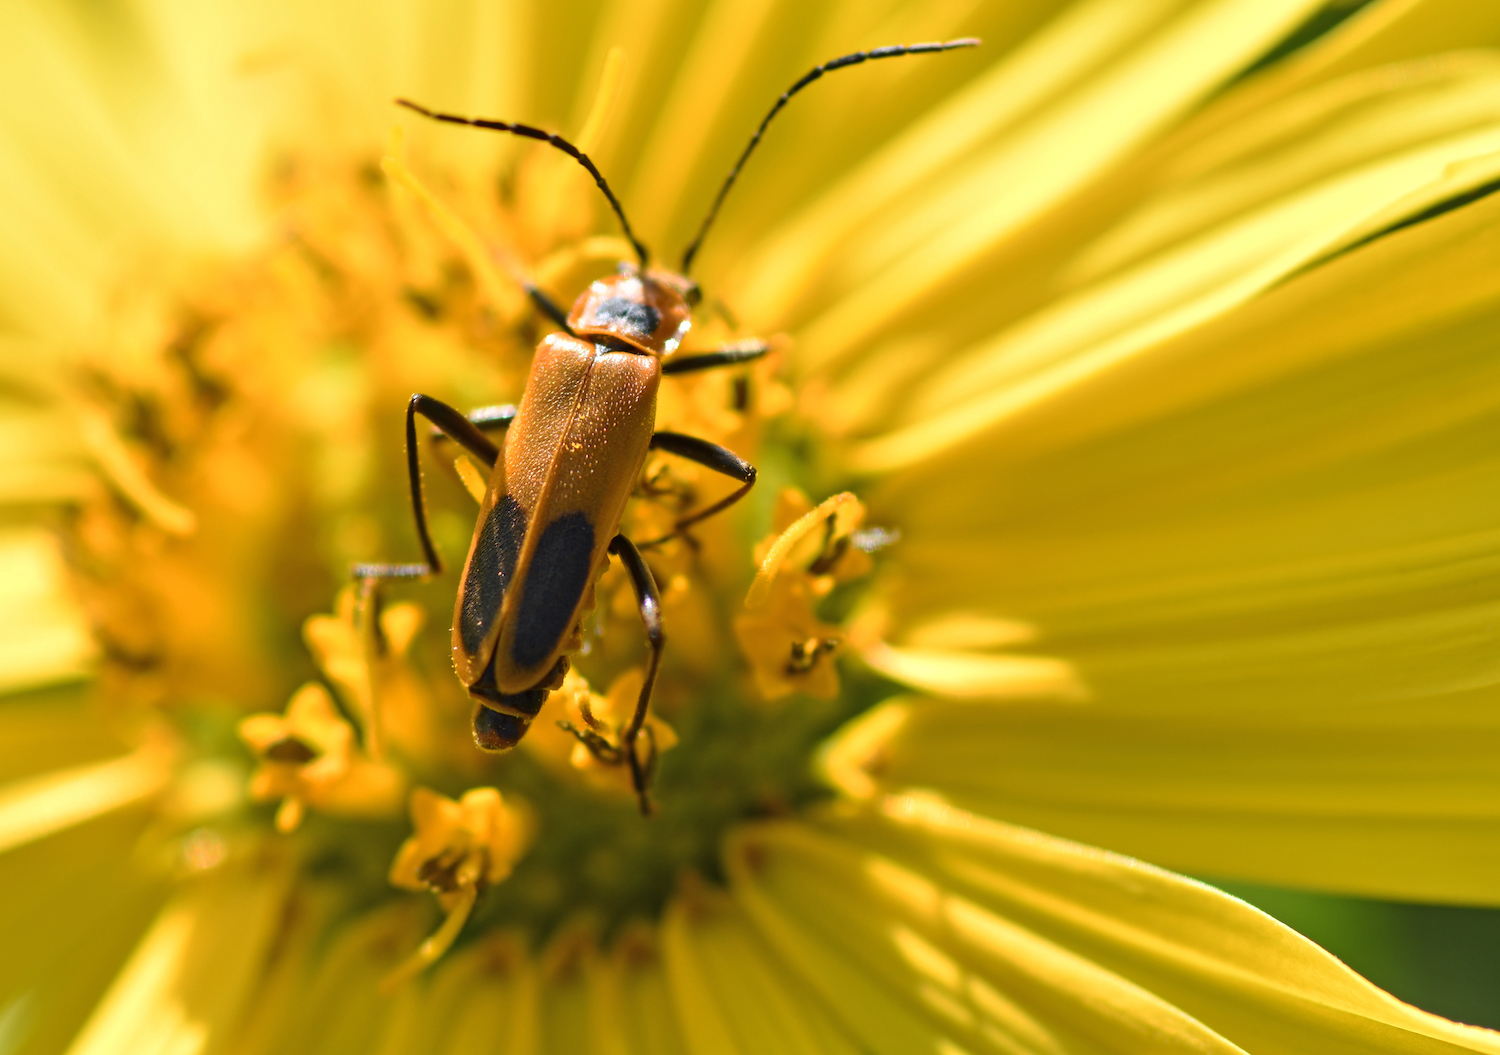 A soldier beetle on a yellow flower.